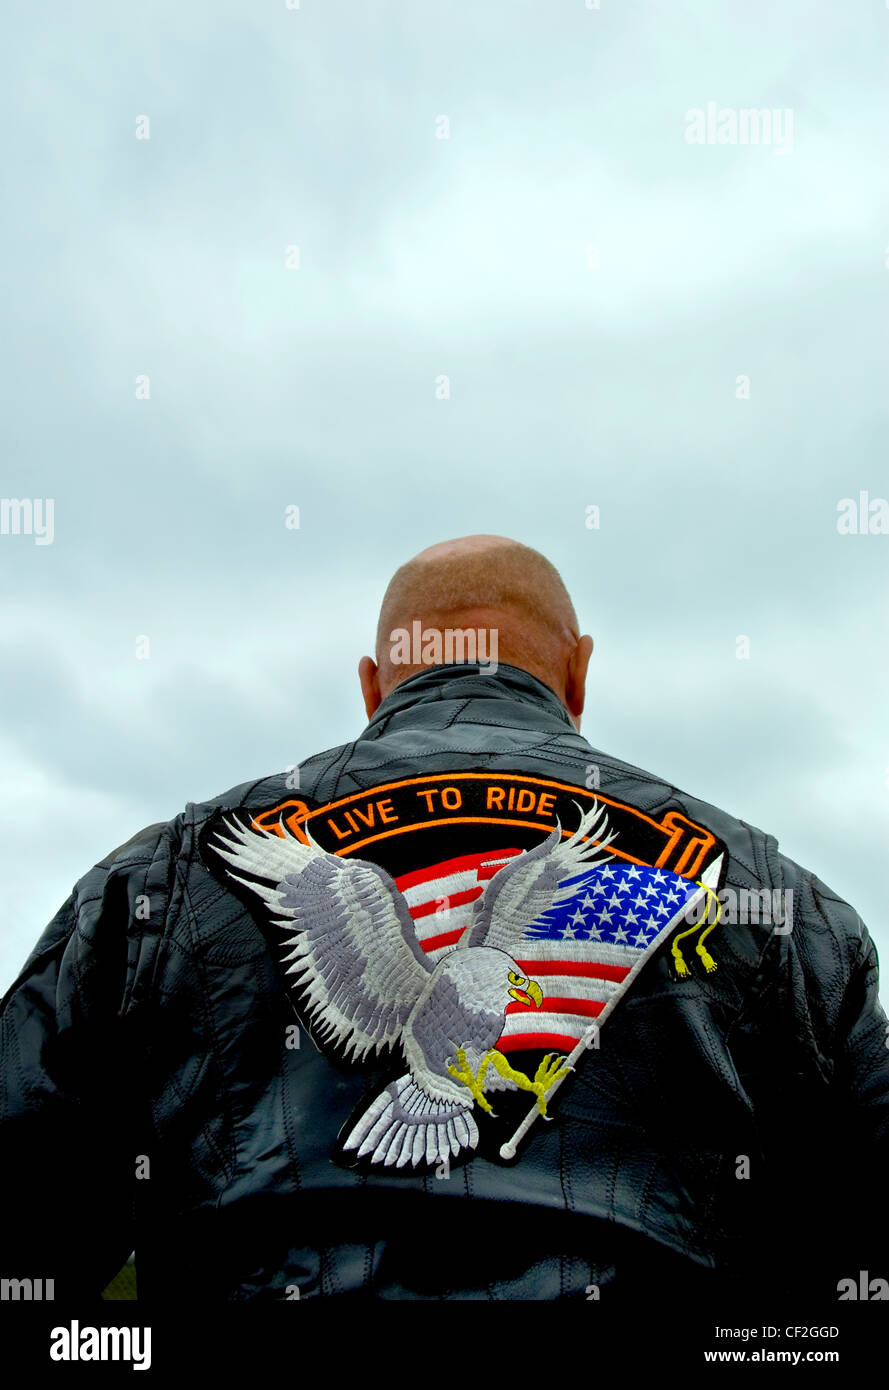 A biker wearing a leather jacket with an eagle carrying a stars and stripes flag emblem on the back. Stock Photo